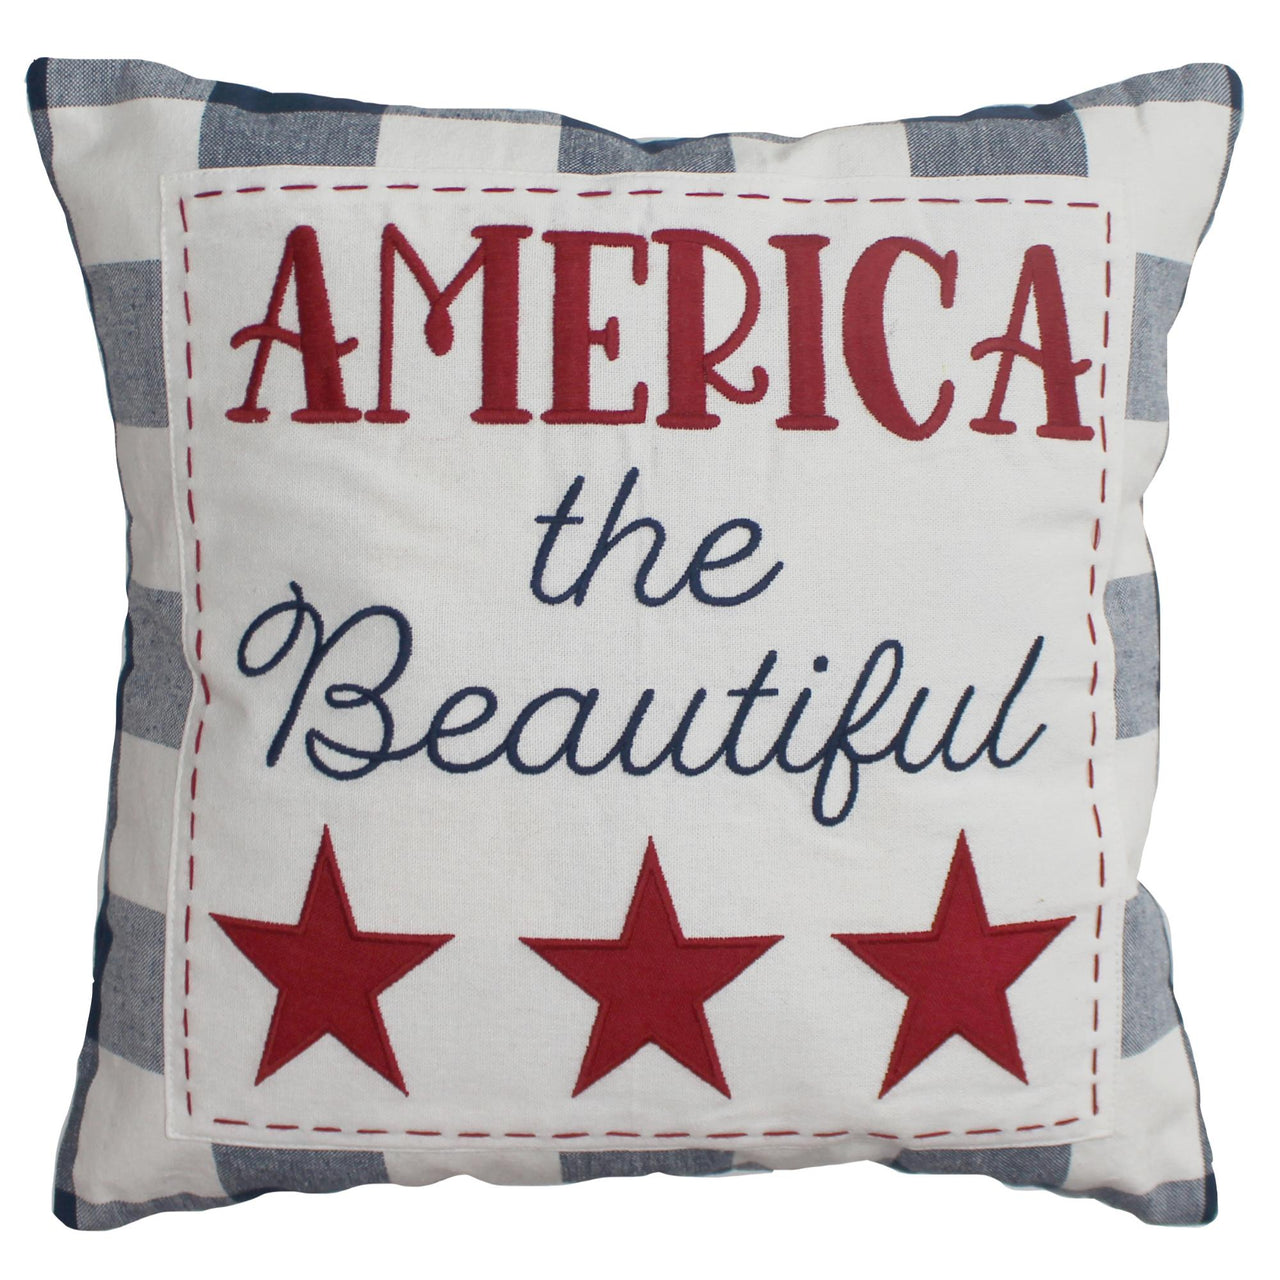 America the beautiful Pillow 14”x14” - Interiors by Elizabeth